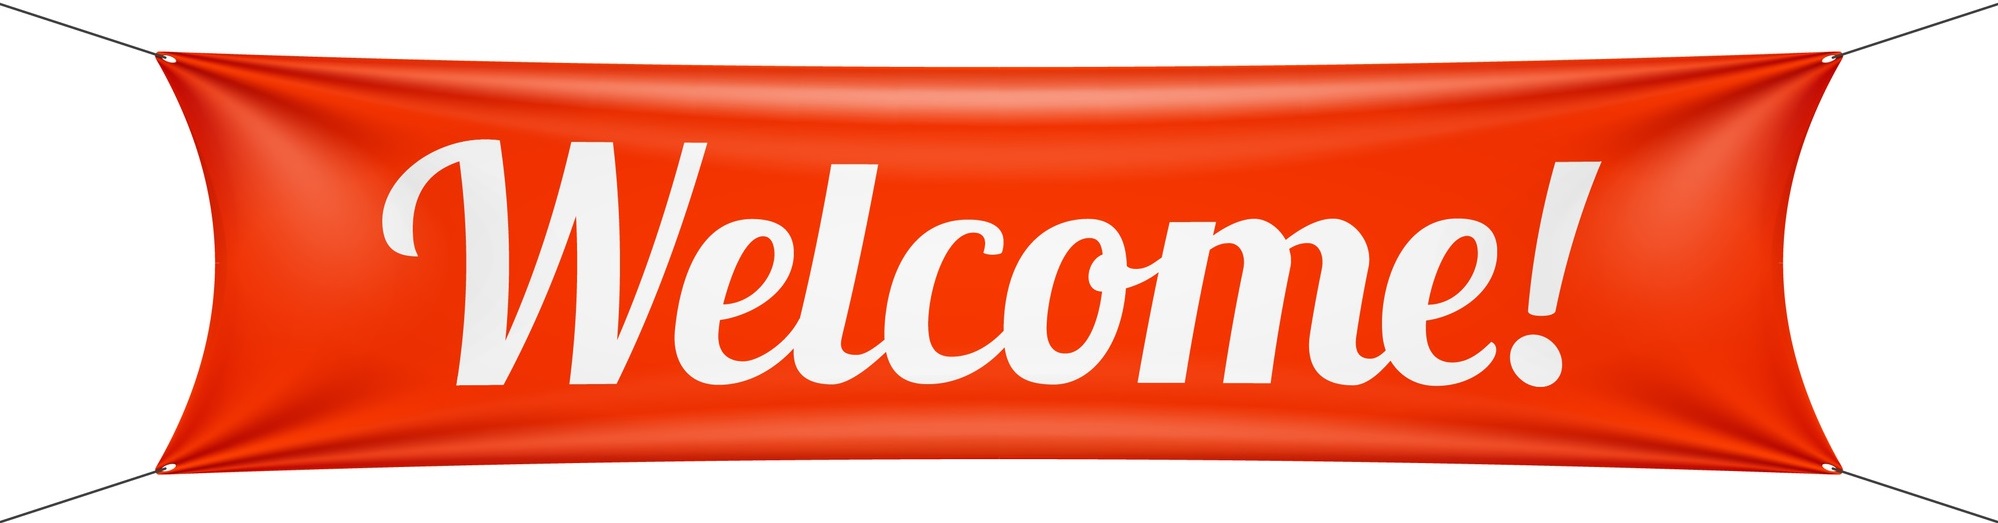 WELCOME BANNER RED